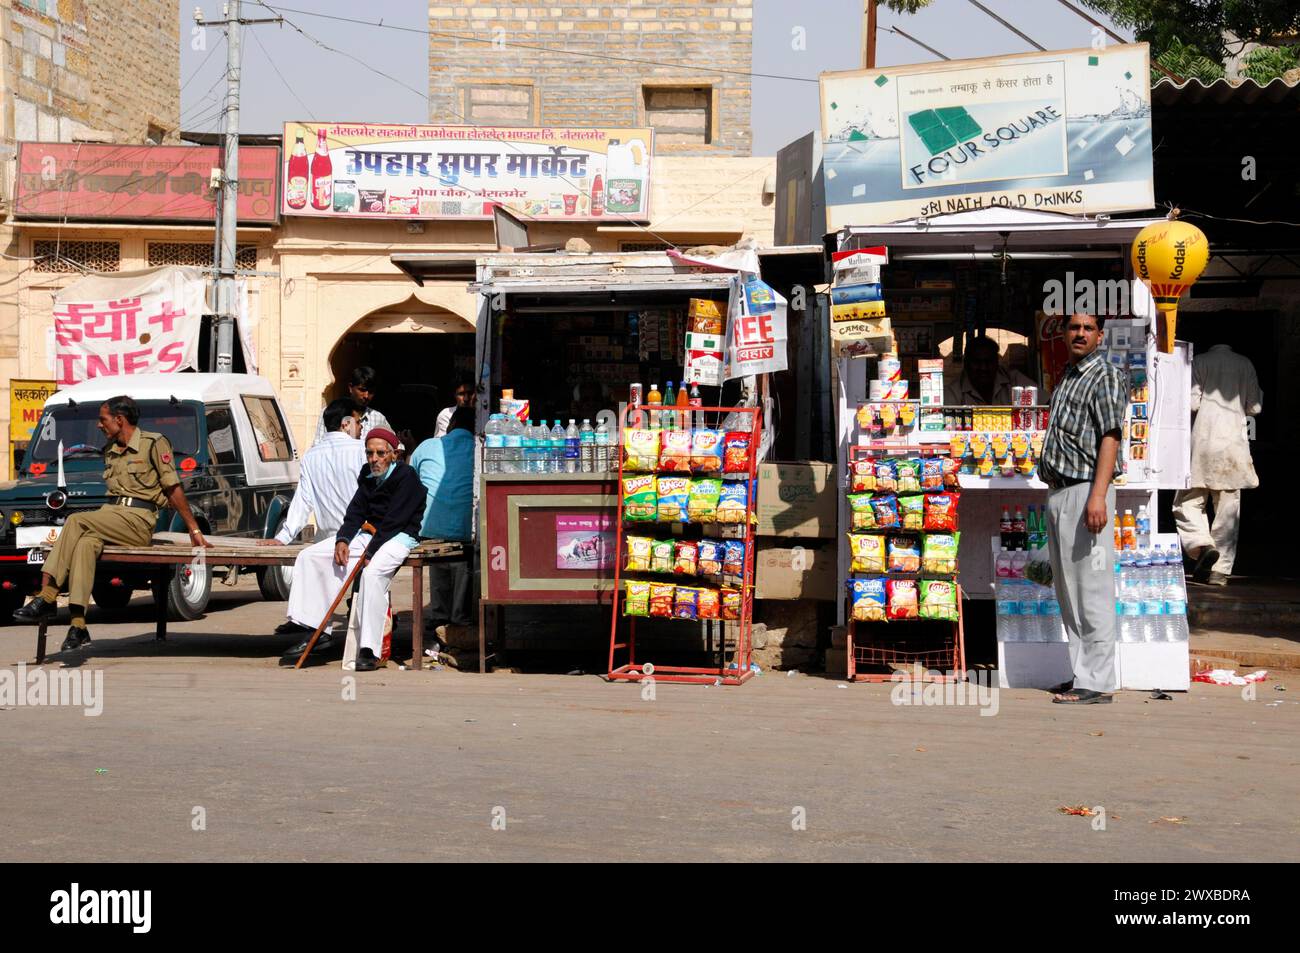 Market stalls and people on a busy street in the city centre, Jaisalmer, Rajasthan, North India, India Stock Photo